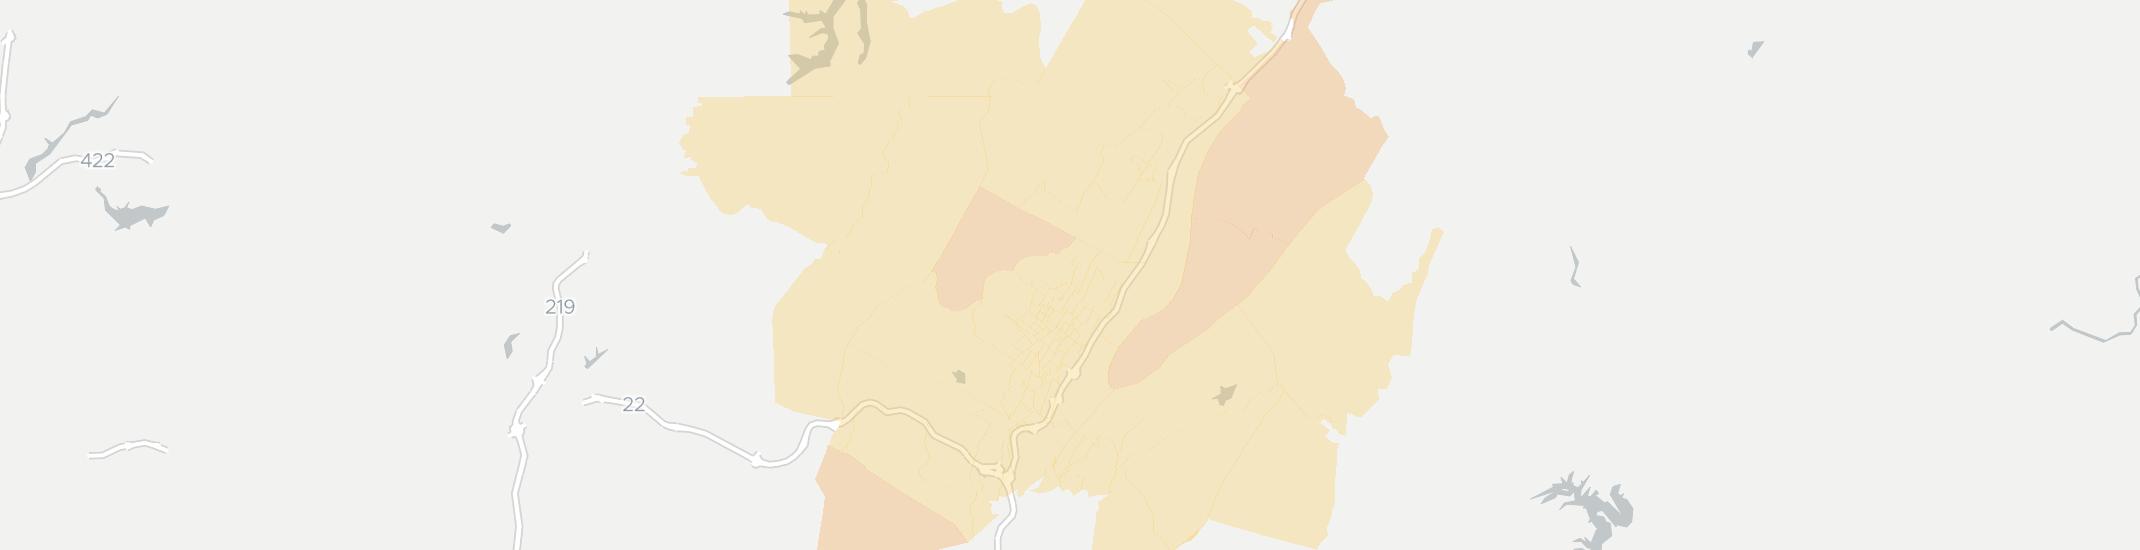 Altoona Internet Competition Map. Click for interactive map.